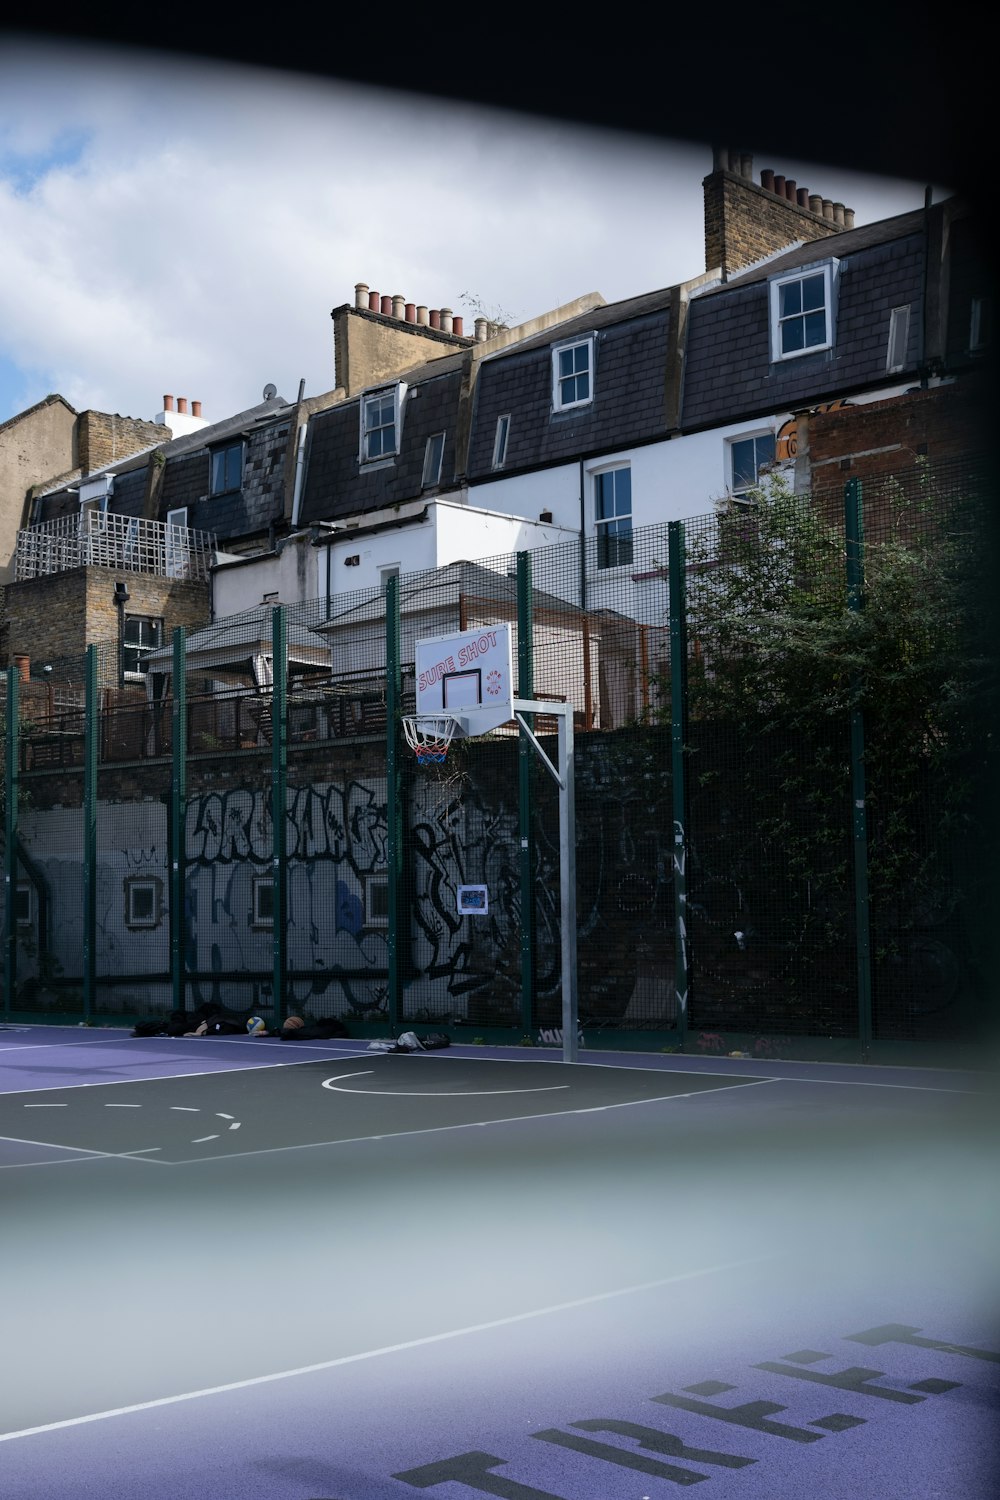 a basketball court with graffiti on the side of it